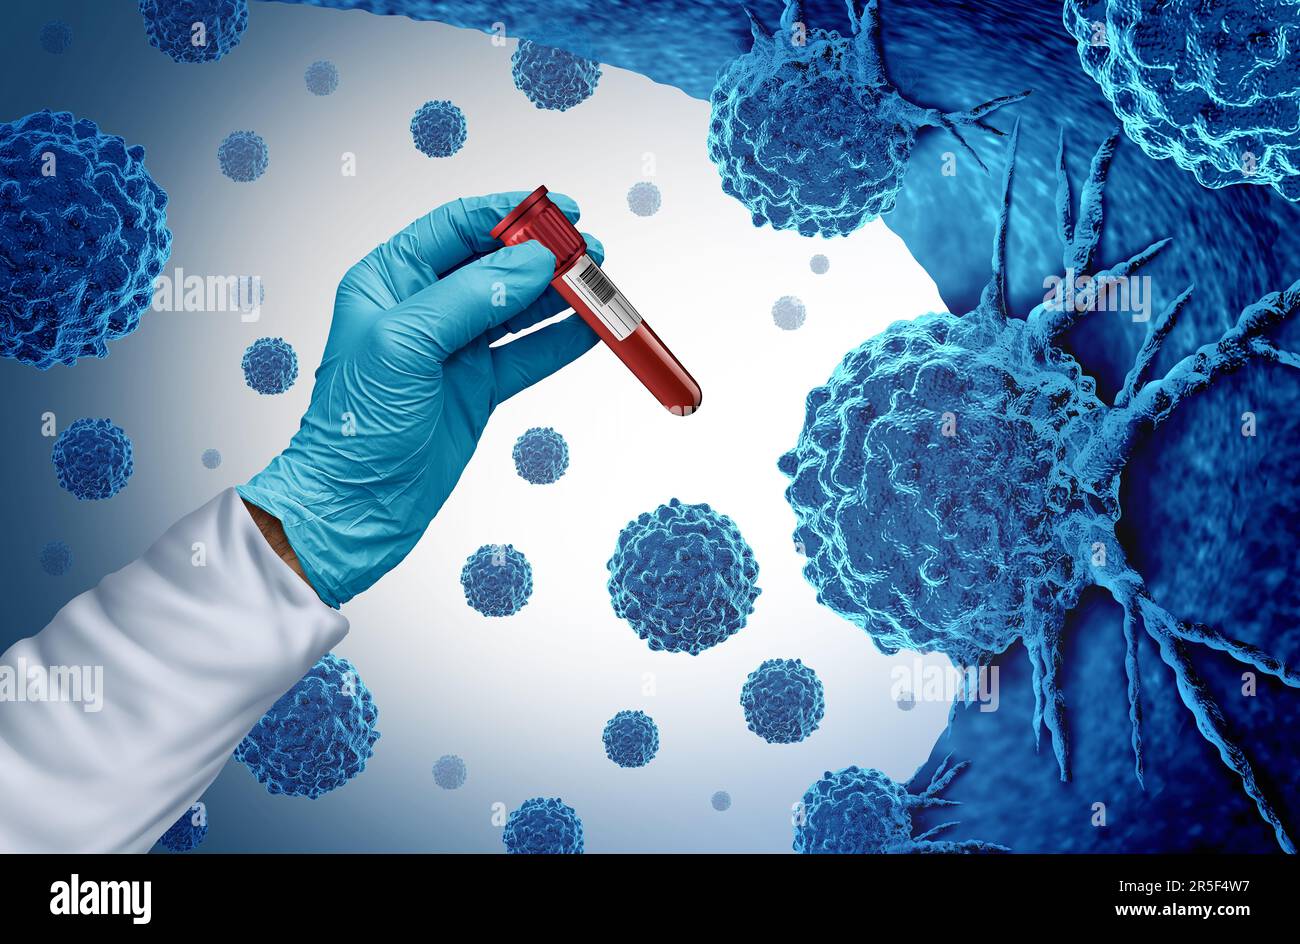 Multi Cancer blood test and screening for early detection of cancers and malignant cells as carcinogens and genetics with a cancerous cell Stock Photo